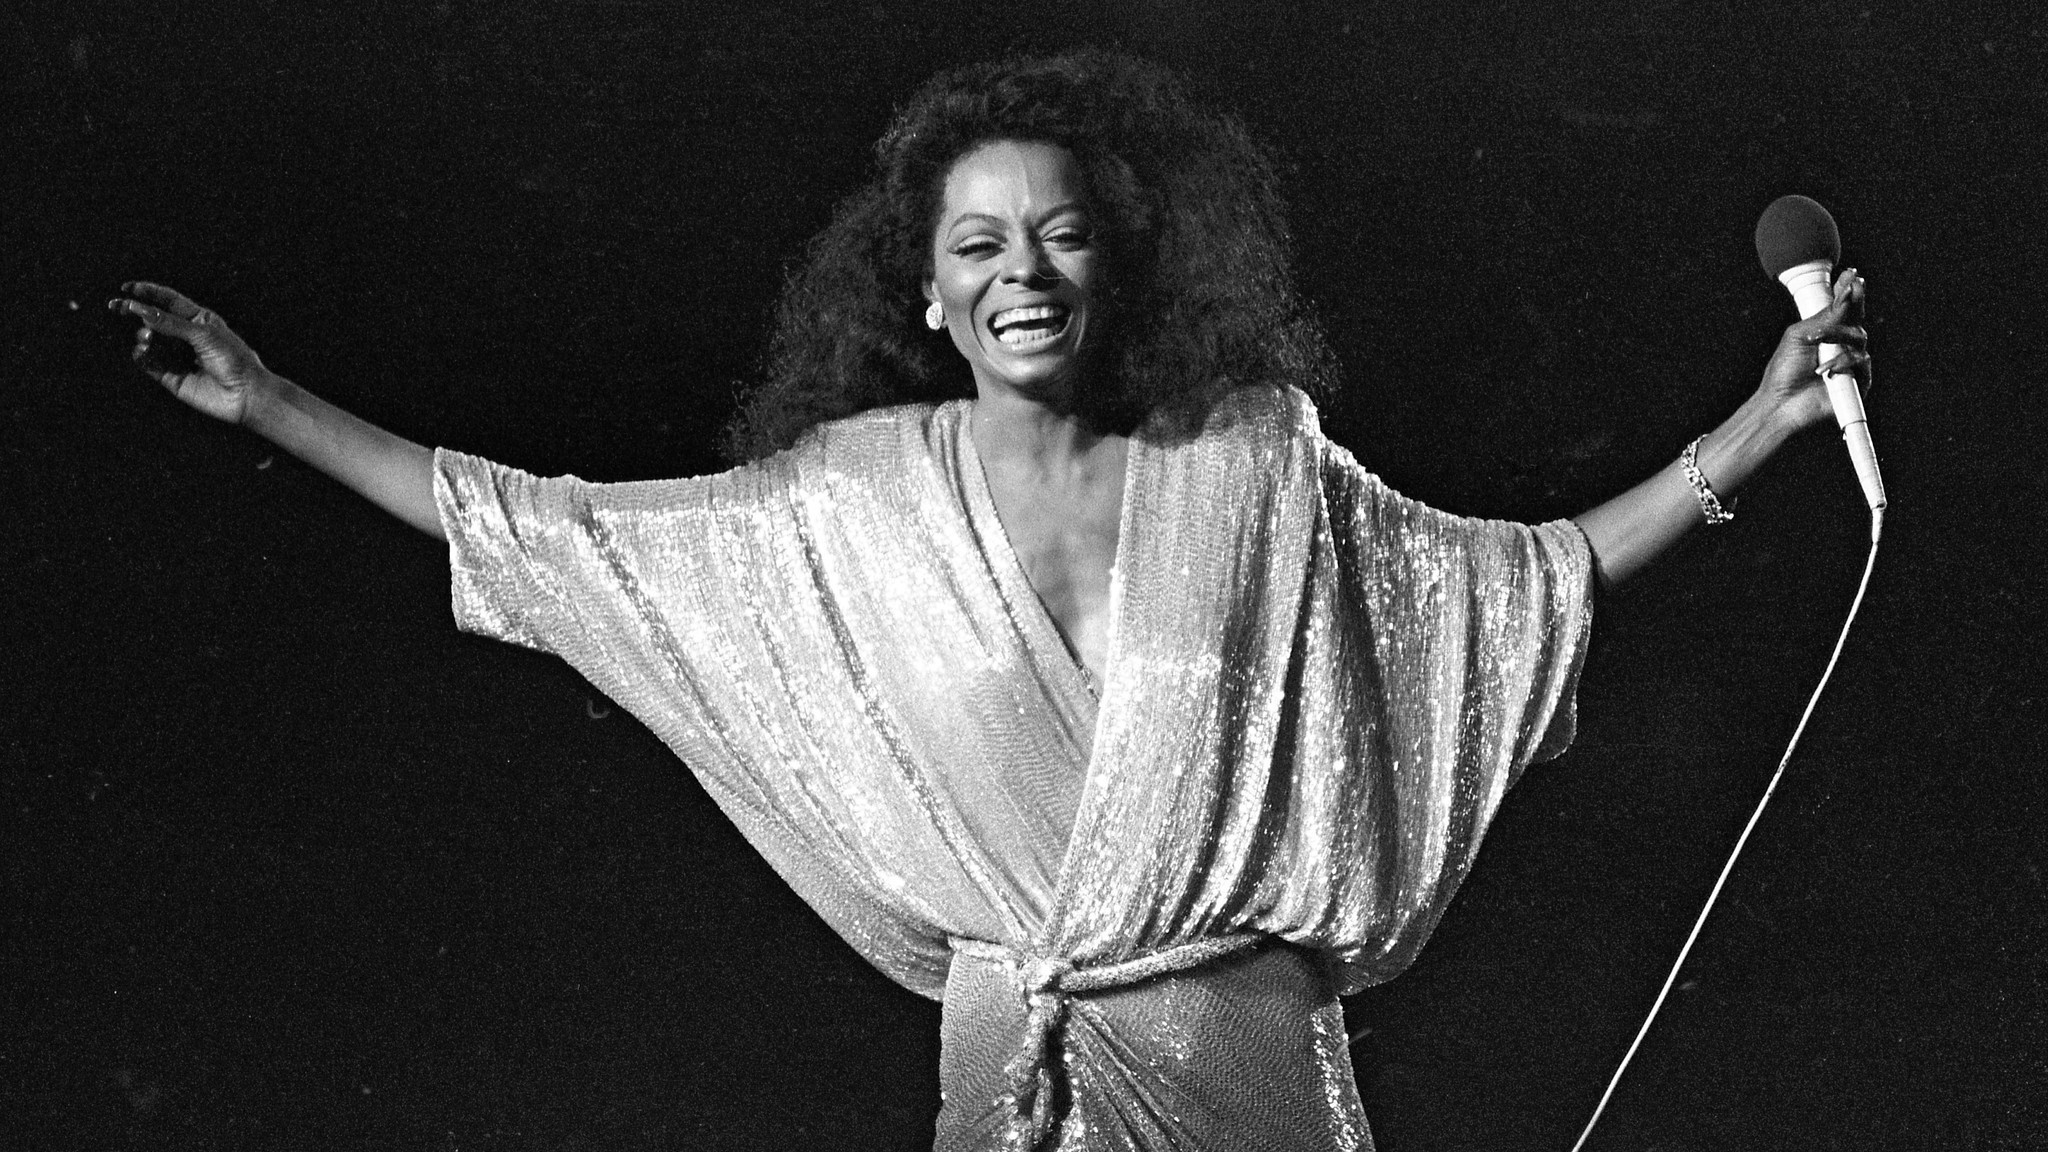 Diana Ross Image The Entertainer HD Wallpaper And Background